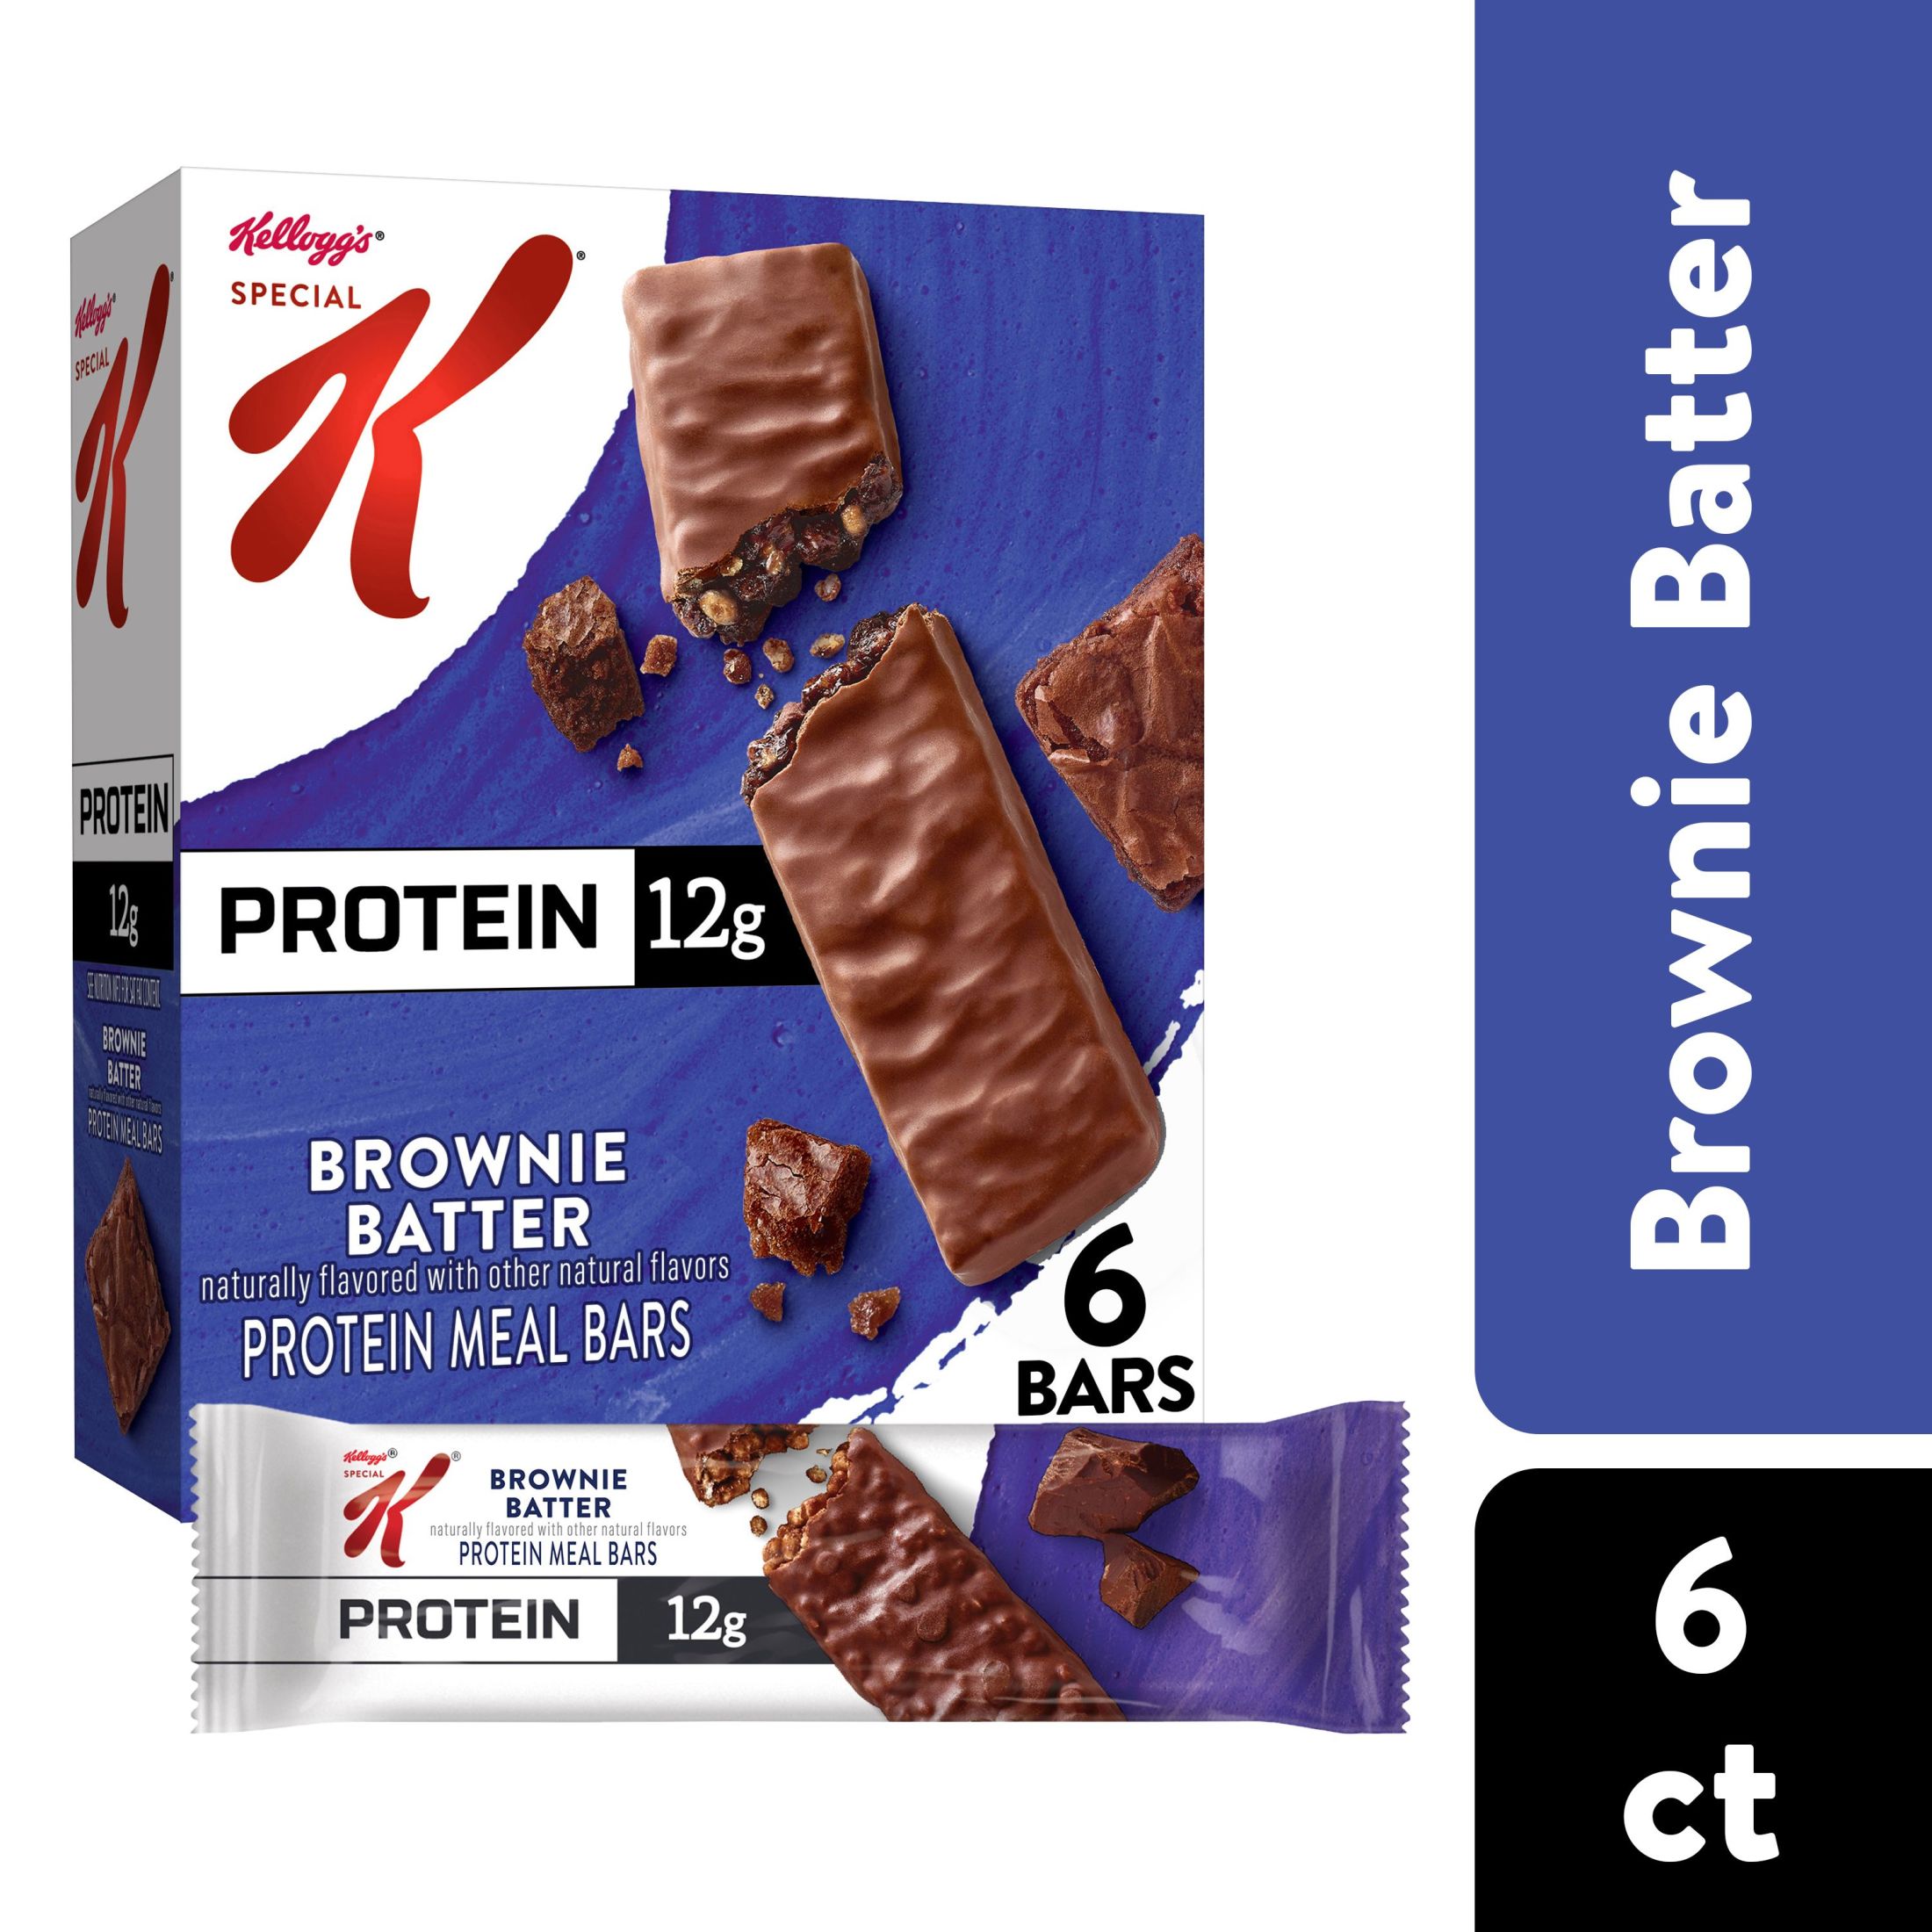 Kellogg's Special K Brownie Batter Chewy Protein Meal Bars, Ready-to-Eat, 9.5 oz, 6 Count - image 1 of 13